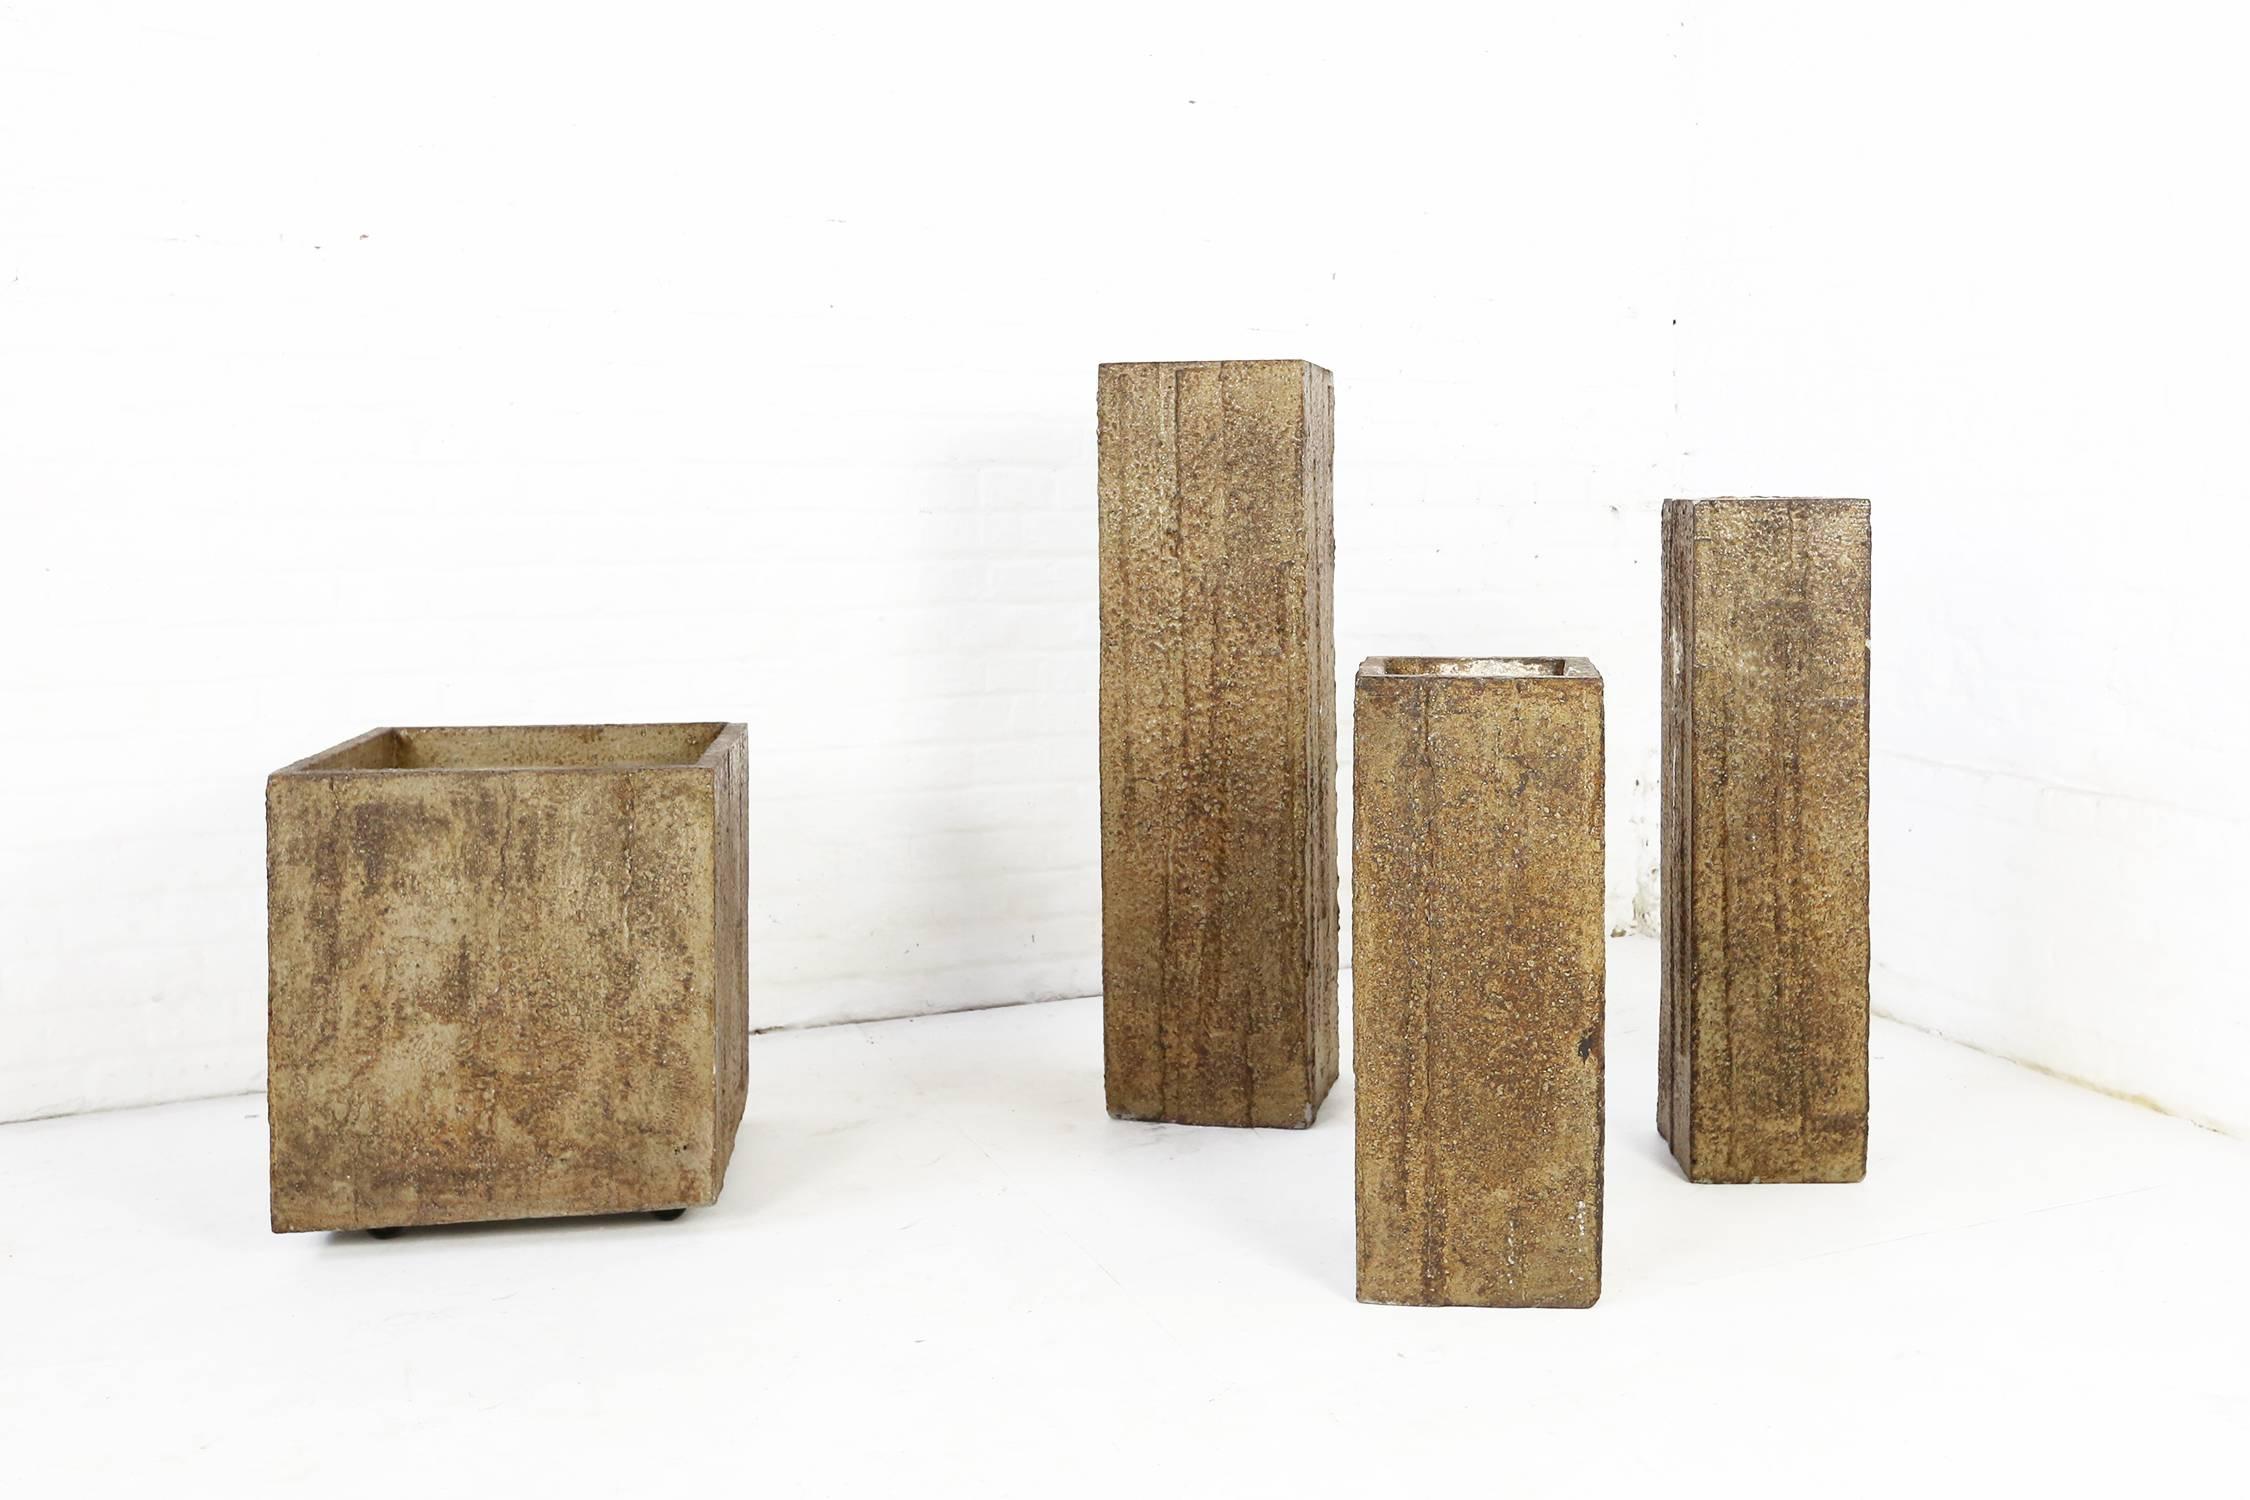 This one of a kind Pia Manu patinated concrete planters were made for a private home in Belgium

Dimensions: 40 x 40 x 45cm
 24 x 24 x 85cm
 22 x 22 x 55 cm
 19 x 19 x 70cm

Pia Manu is a workshop from Ingelmunster, Belgium founded by Jules